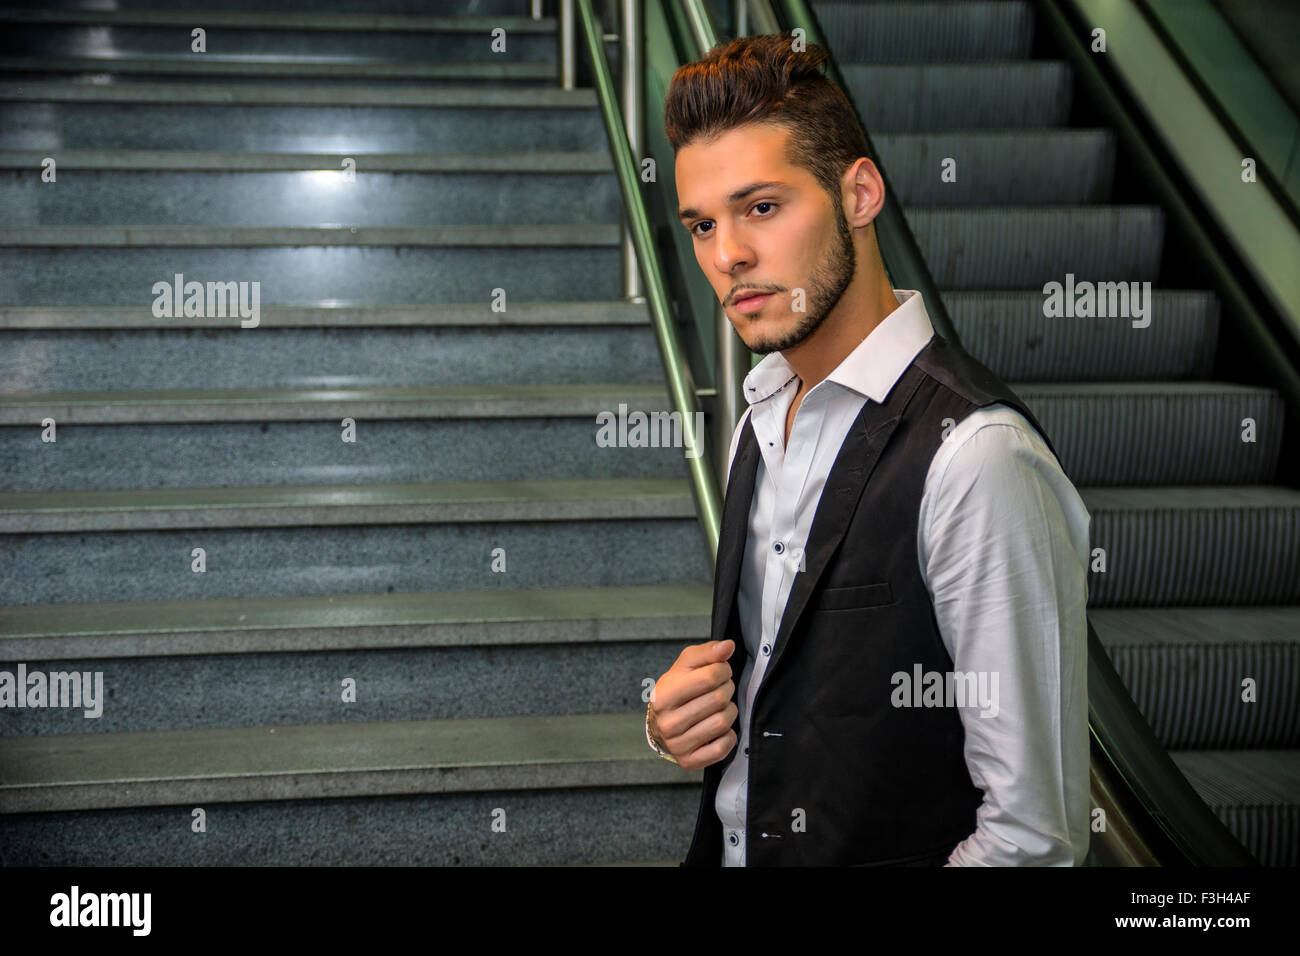 Profile shot of handsome young man inside train station looking at camera Stock Photo